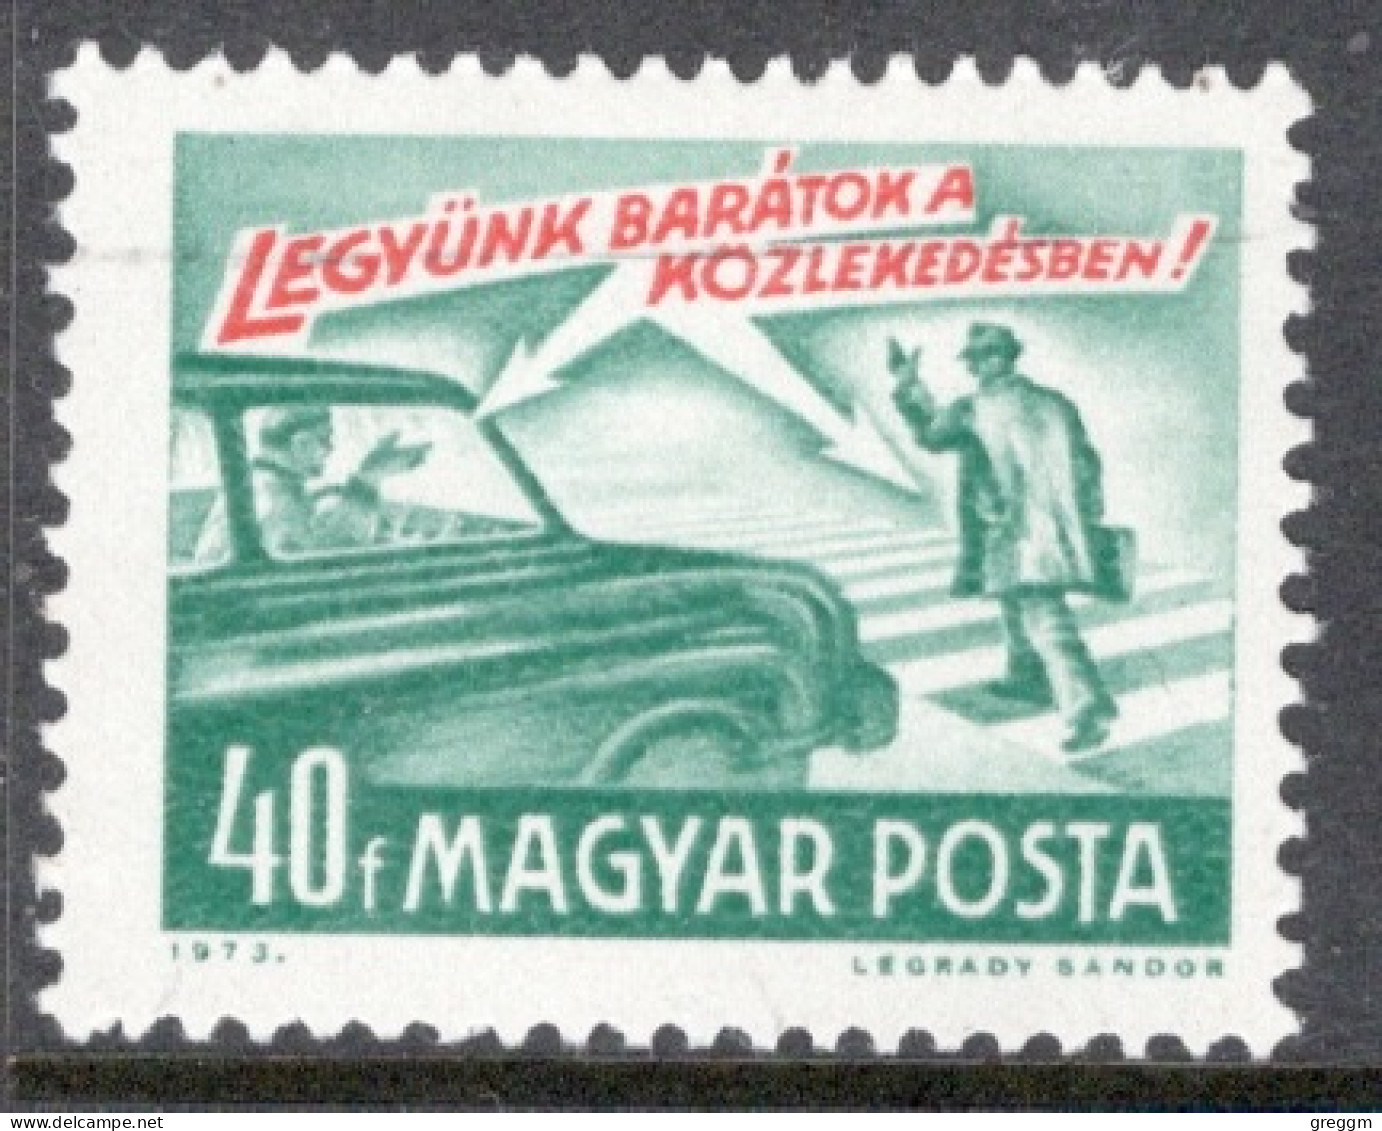 Hungary 1973 Single Stamp Showing Safety In Traffic In Fine Used - Usado